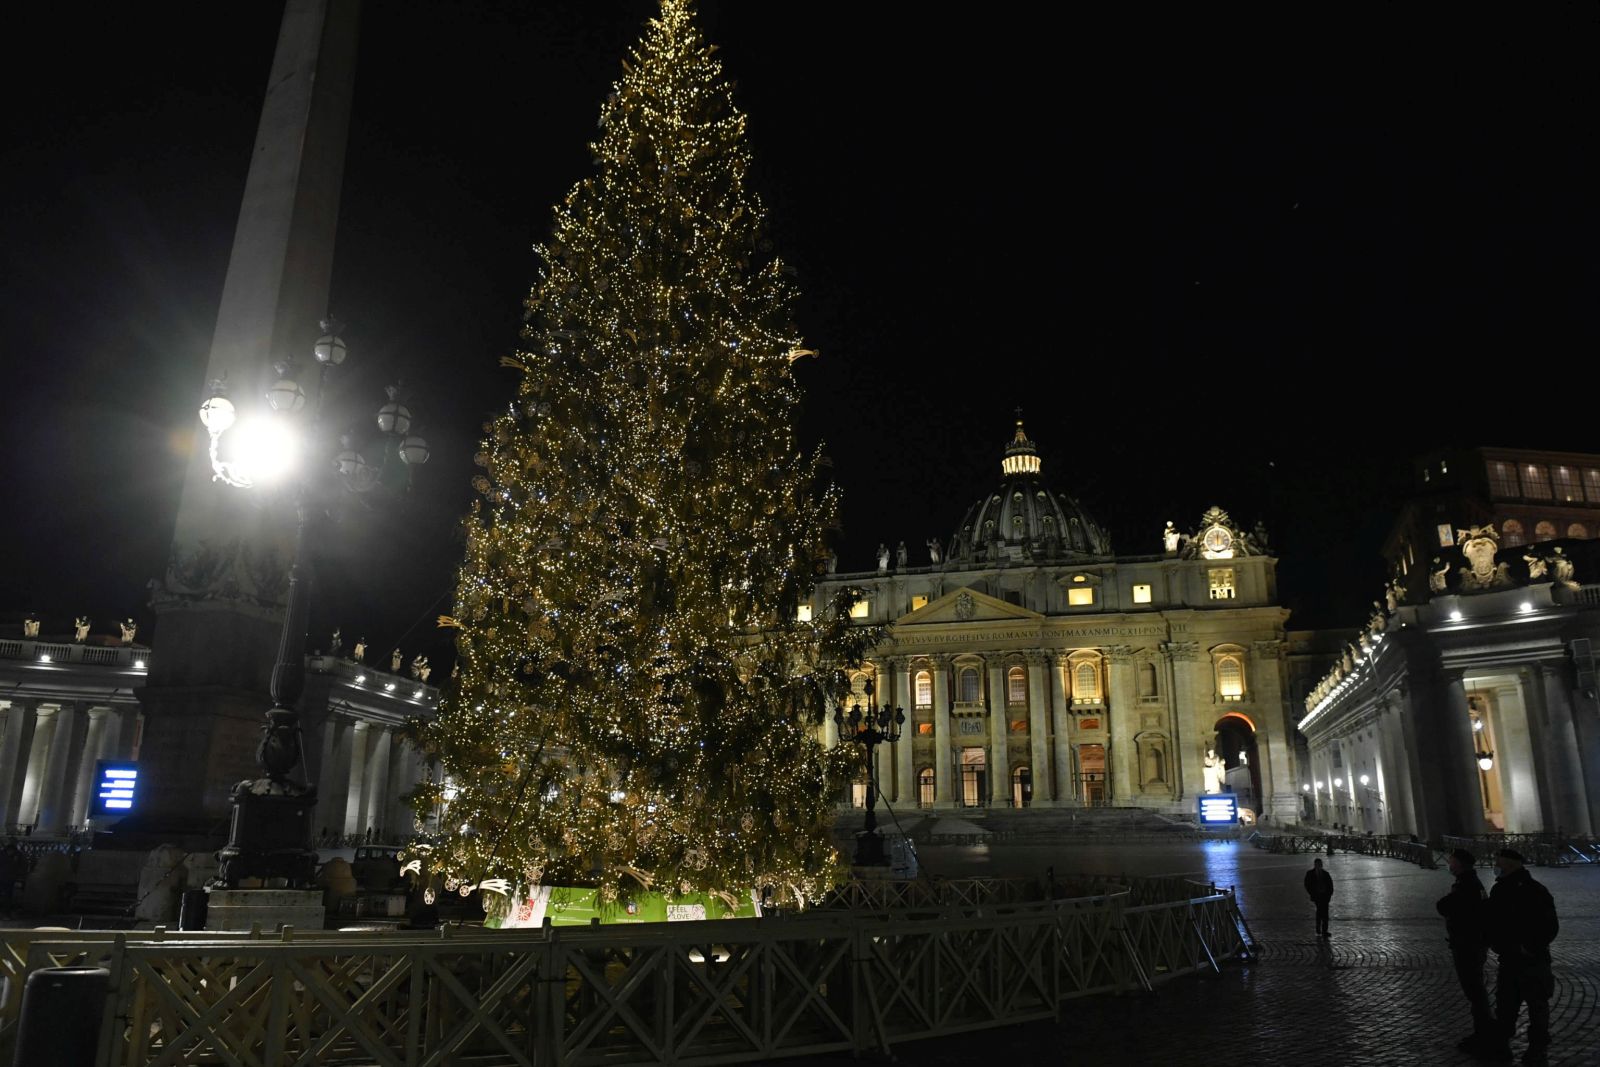 epa08877878 A handout picture, released by Vatican Media Press Office, showing a moment of the Christmas tree lighting and the inauguration of the Nativity scene in St Peter’s Square, Vatican City, 11 December 2020.  EPA/VATICAN MEDIA HANDOUT  HANDOUT EDITORIAL USE ONLY/NO SALES